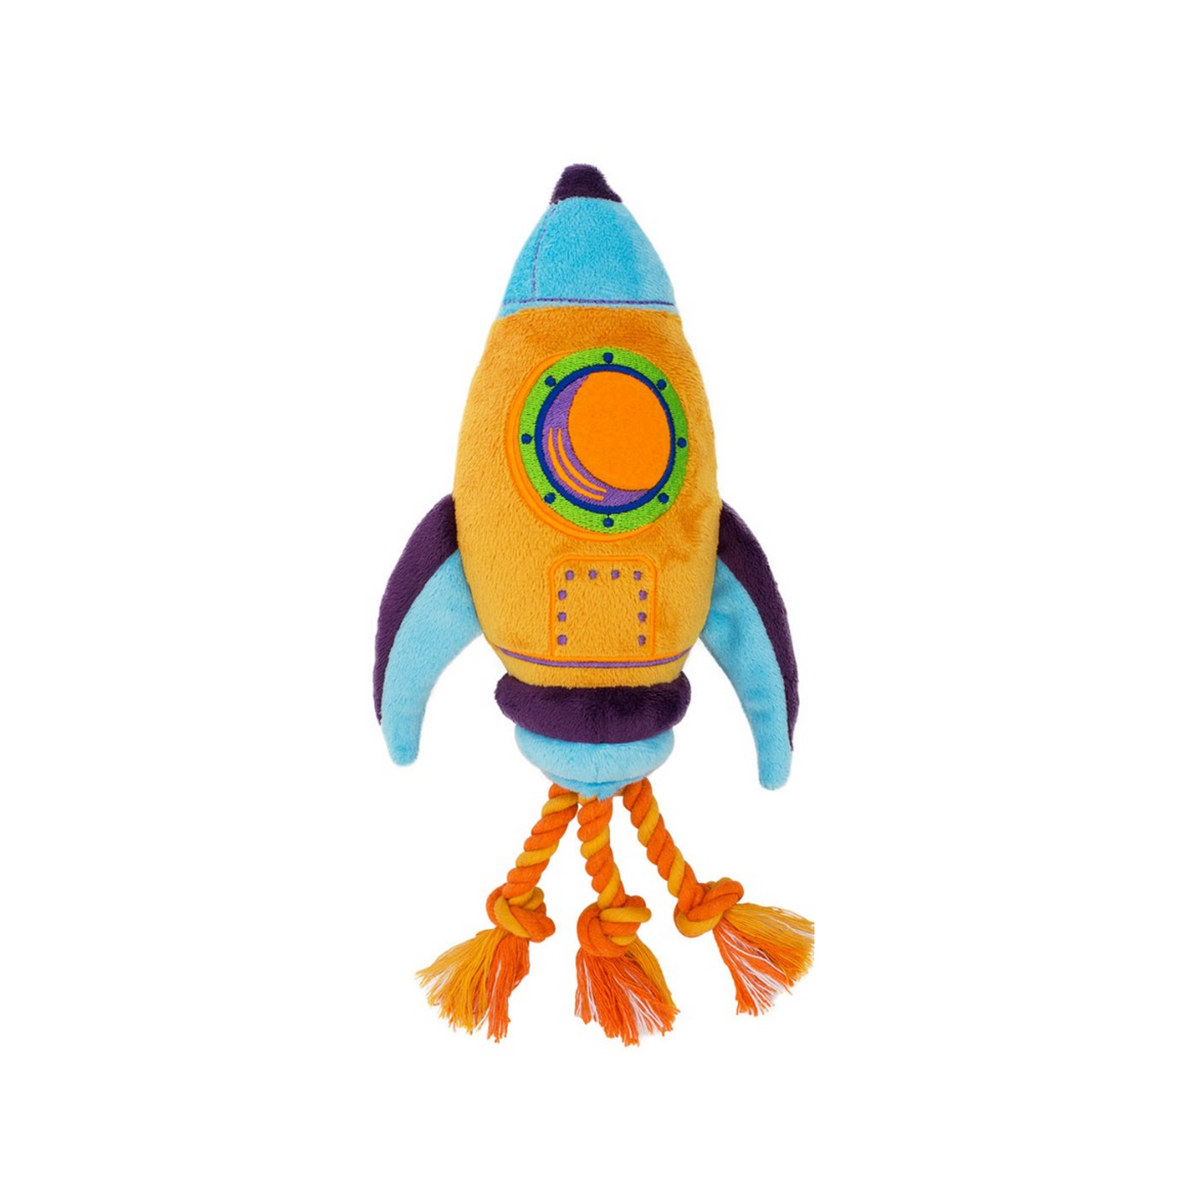 Lovelly Creations Planet Series - Rocket Oe01